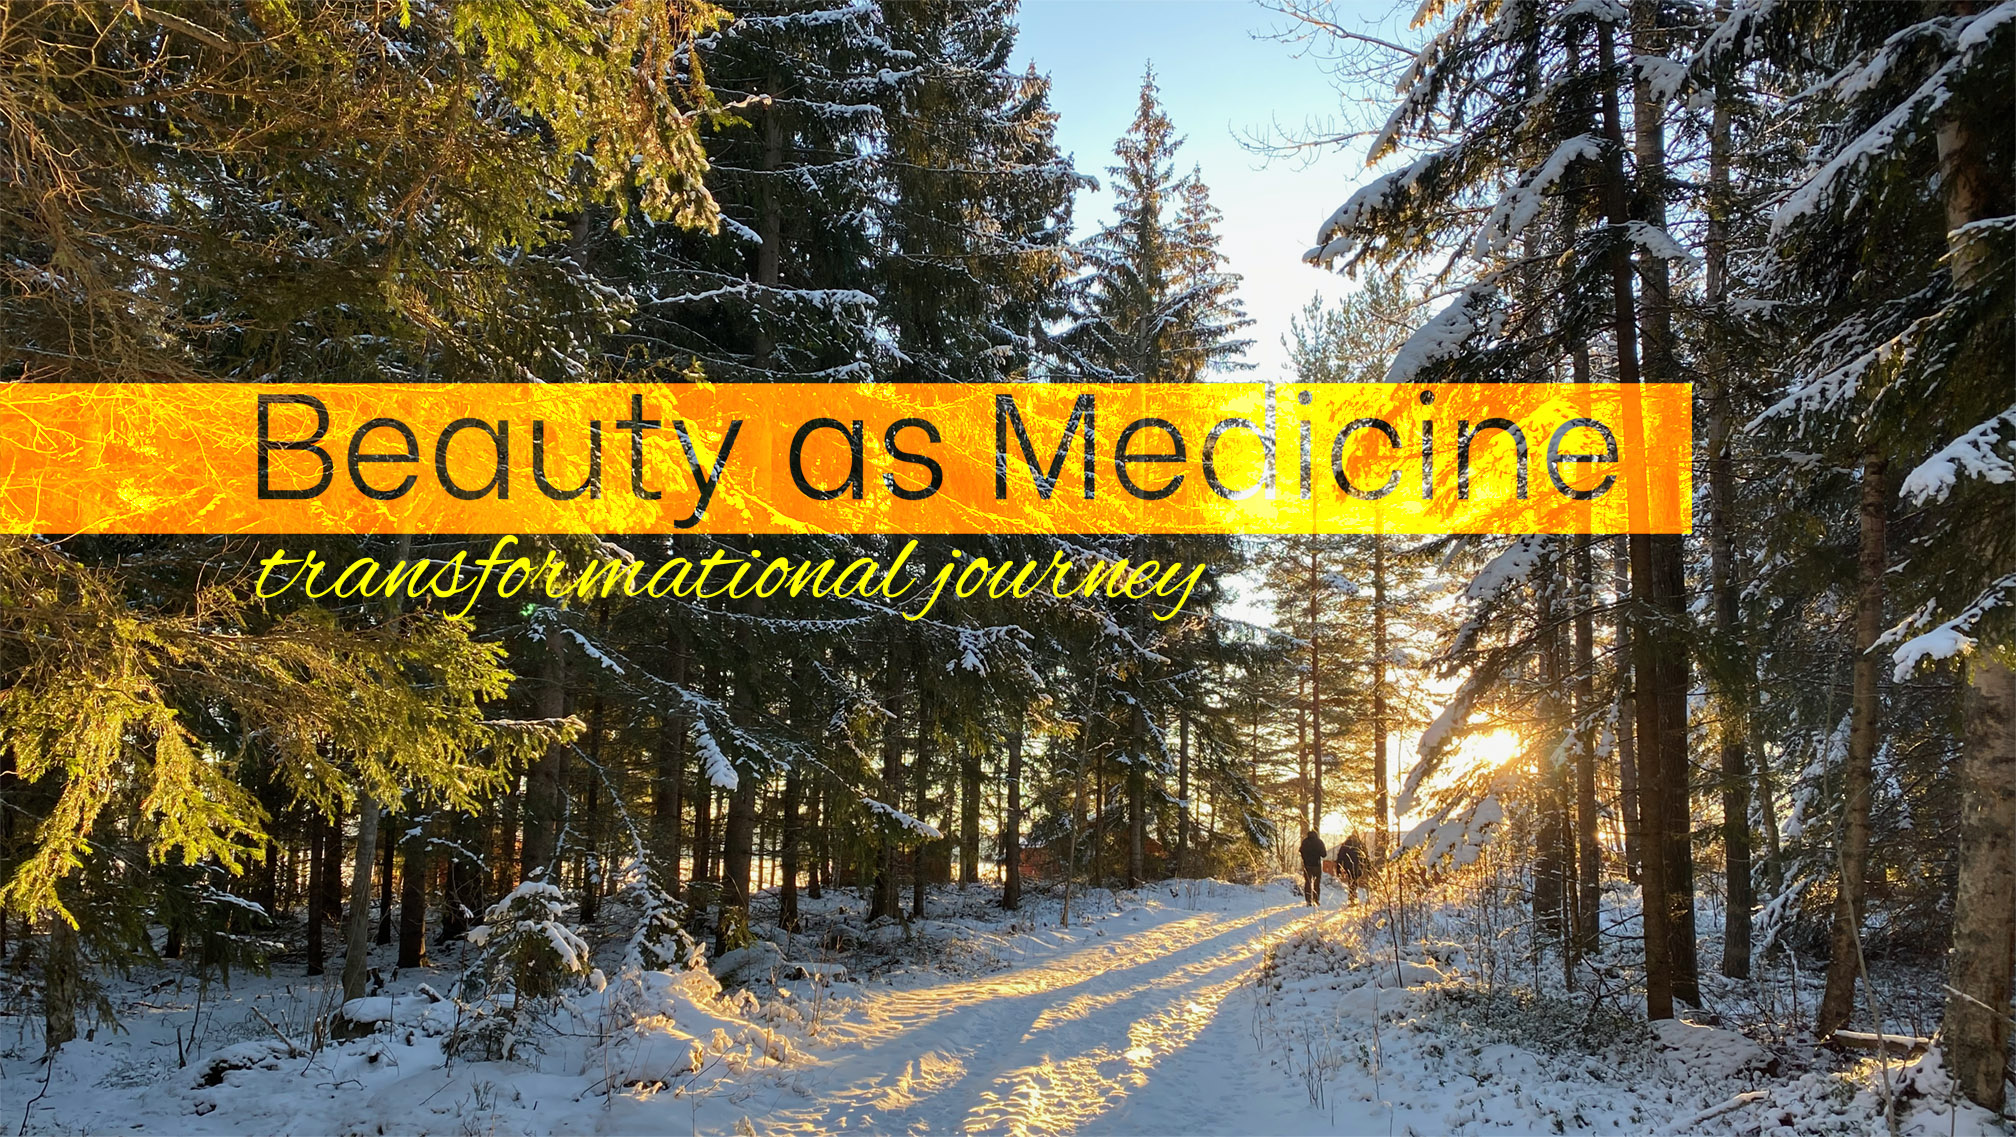 beauty as medicine, transformational journey, liberating potential, authentic self-expression, exploring